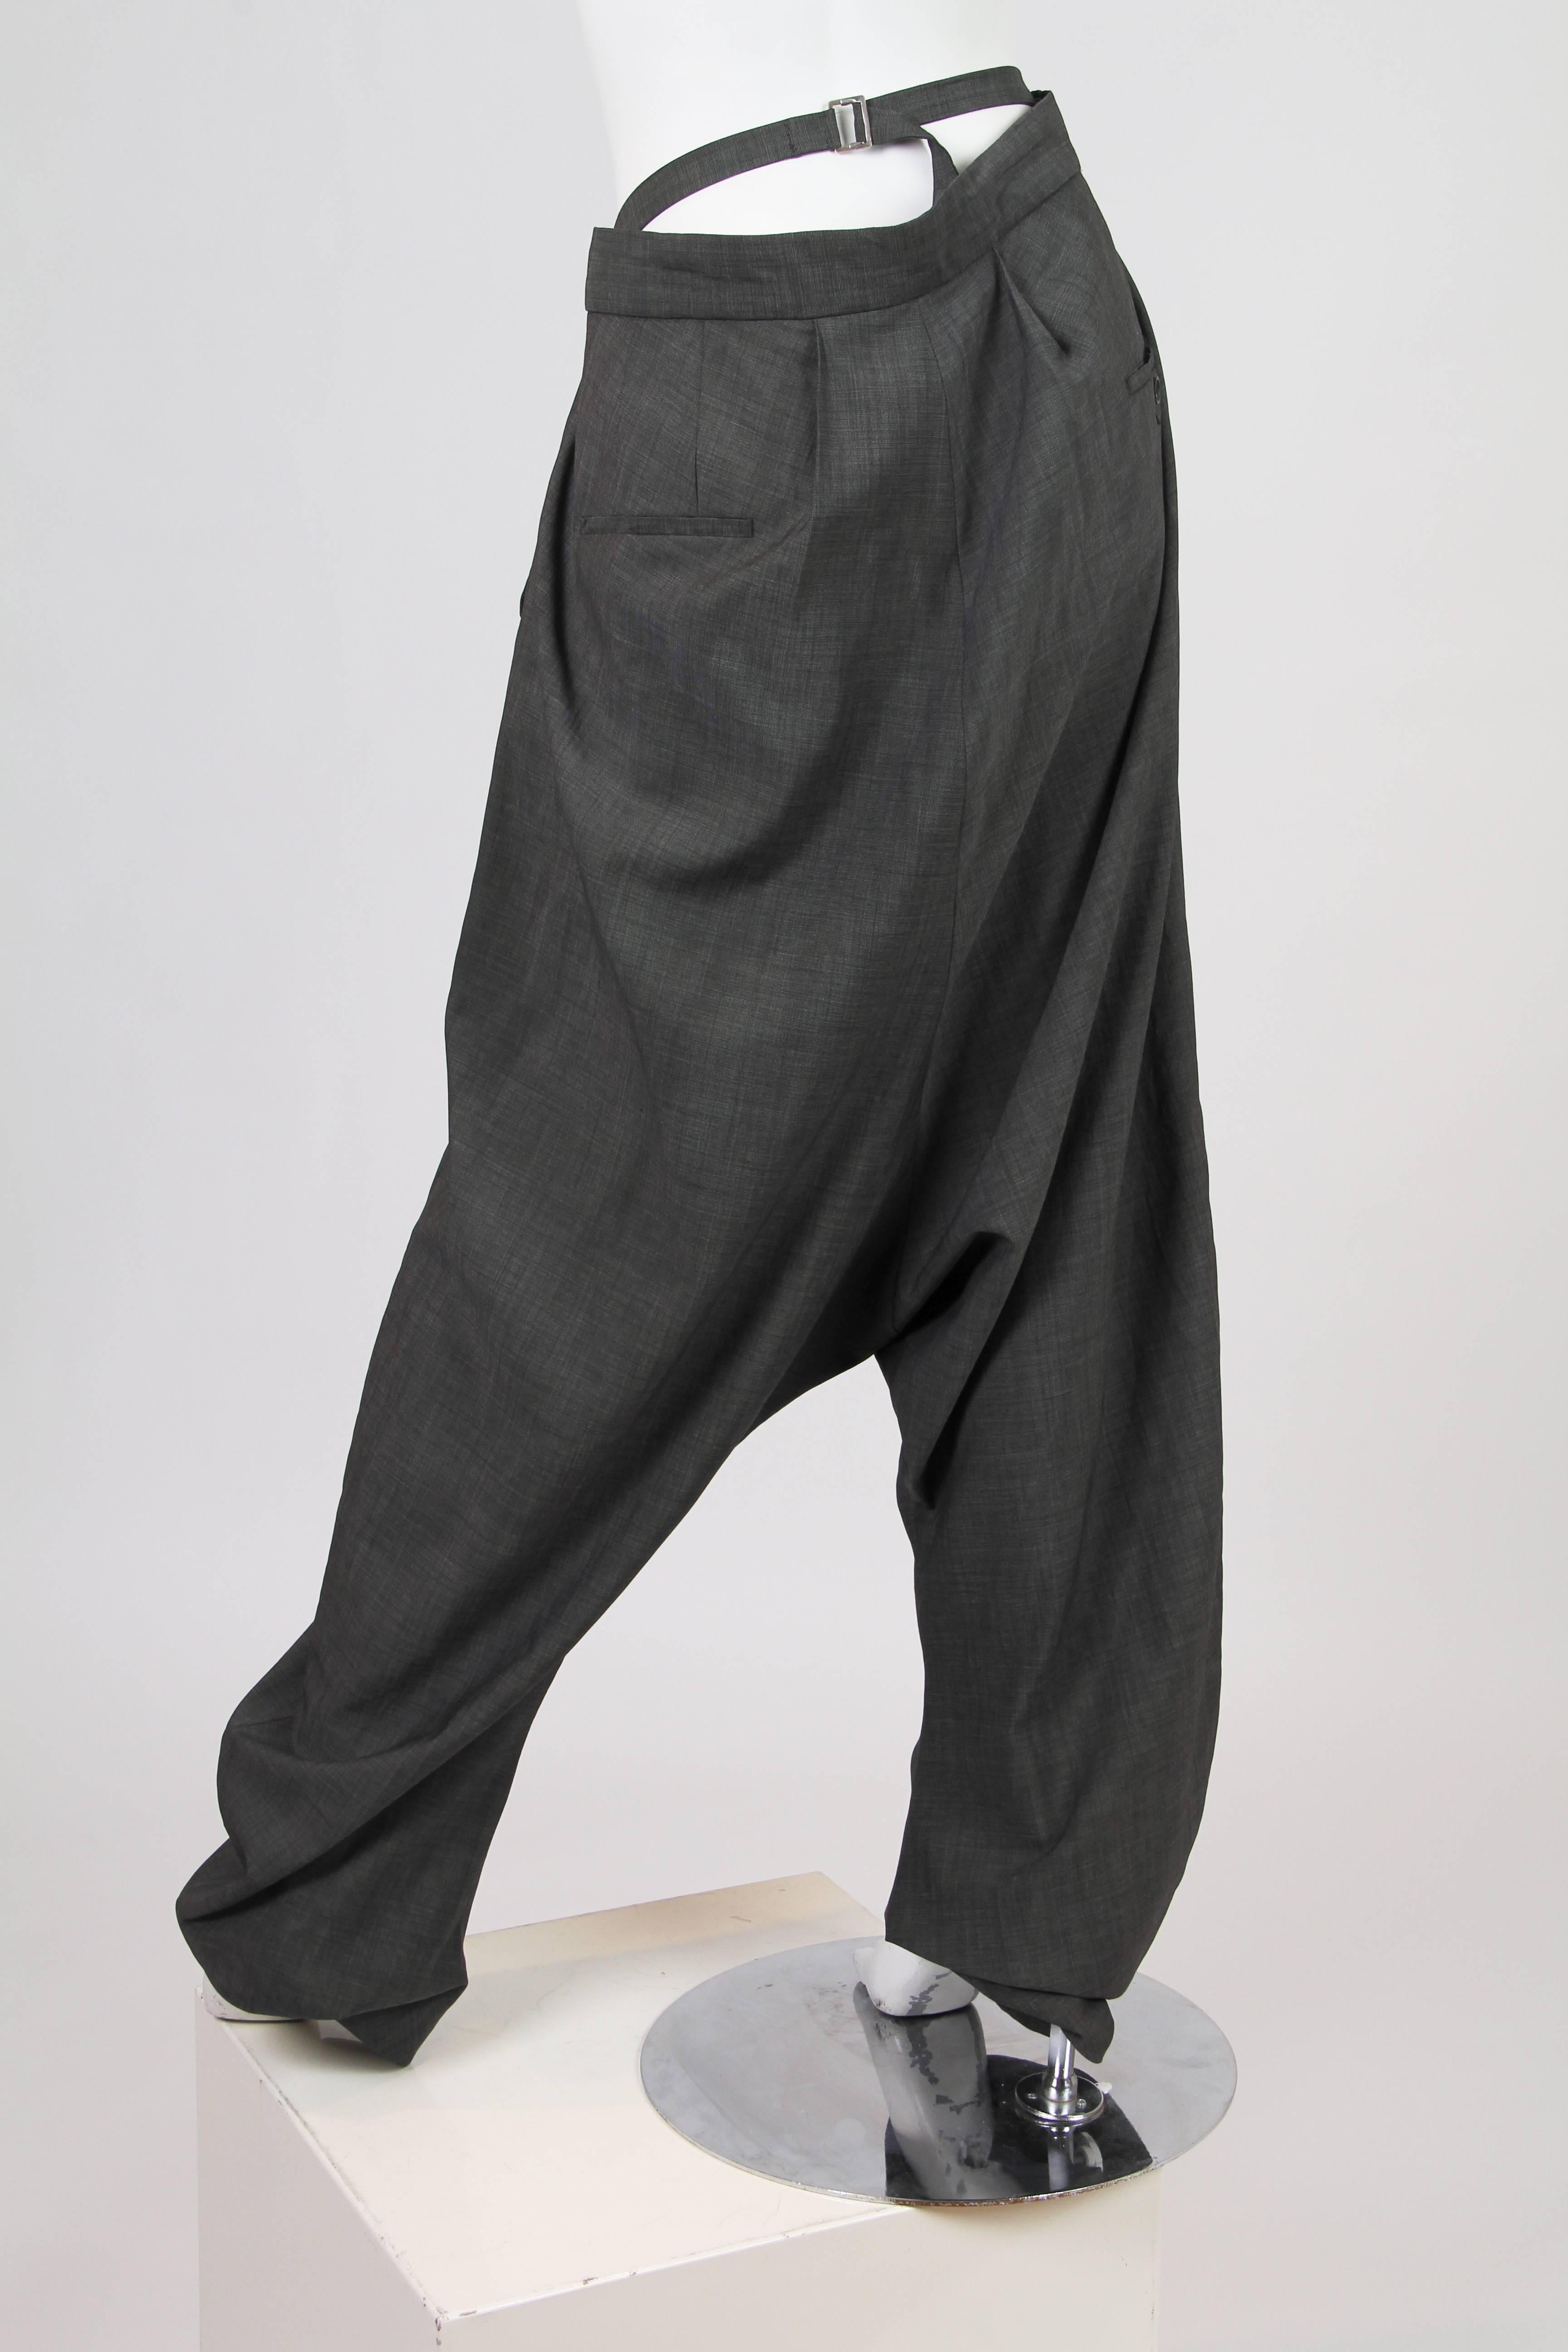 Women's or Men's John Galliano Trousers which double as a Jumpsuit